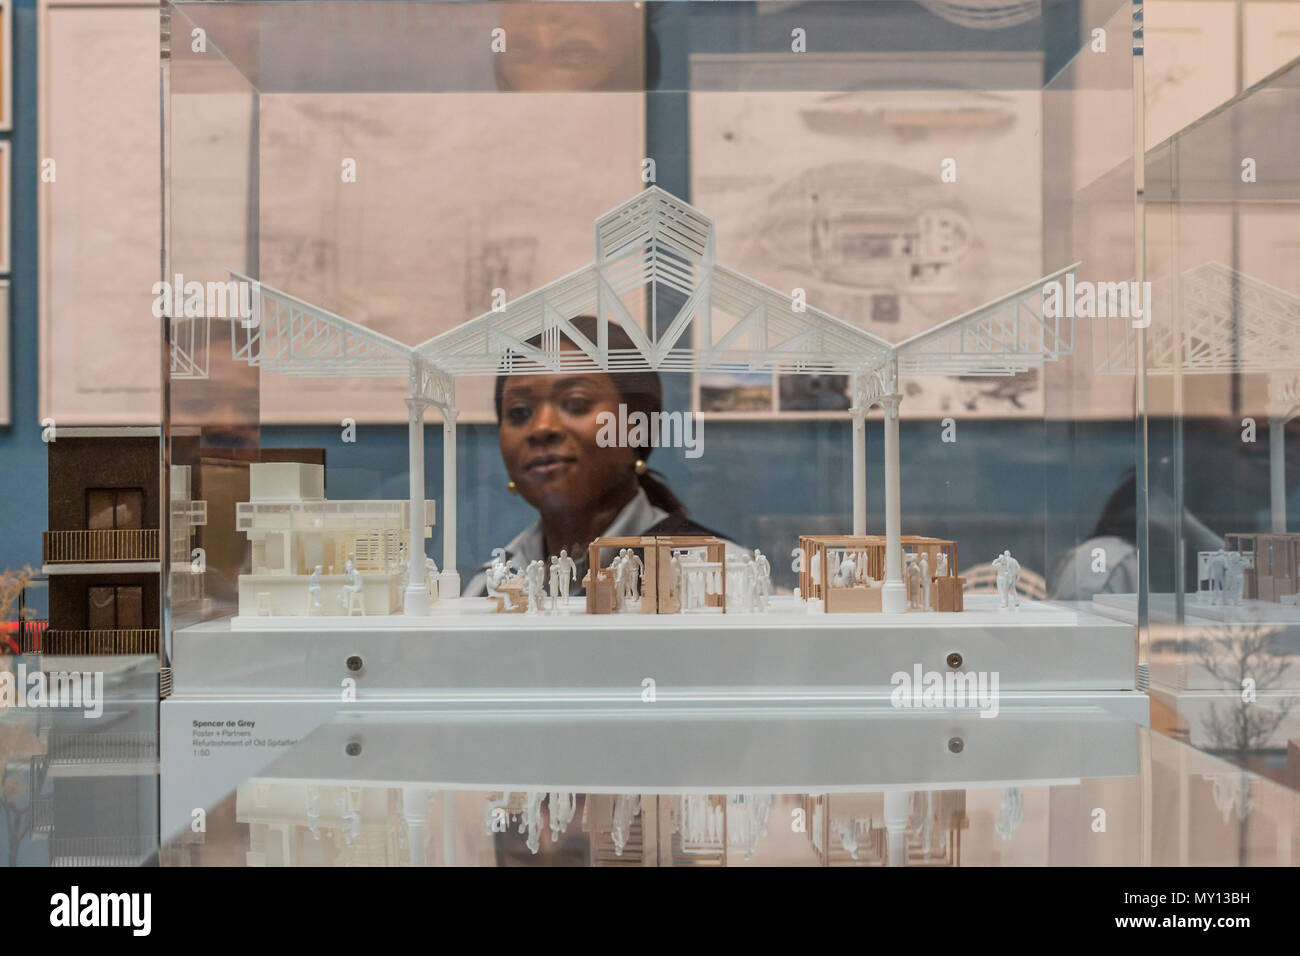 London, UK. 5th Jun, 2018. Architectural models - Royal Academy celebrates its 250th Summer Exhibition, and to mark this momentous occasion, the exhibition is co-ordinated by Grayson Perry RA. Credit: Guy Bell/Alamy Live News Stock Photo